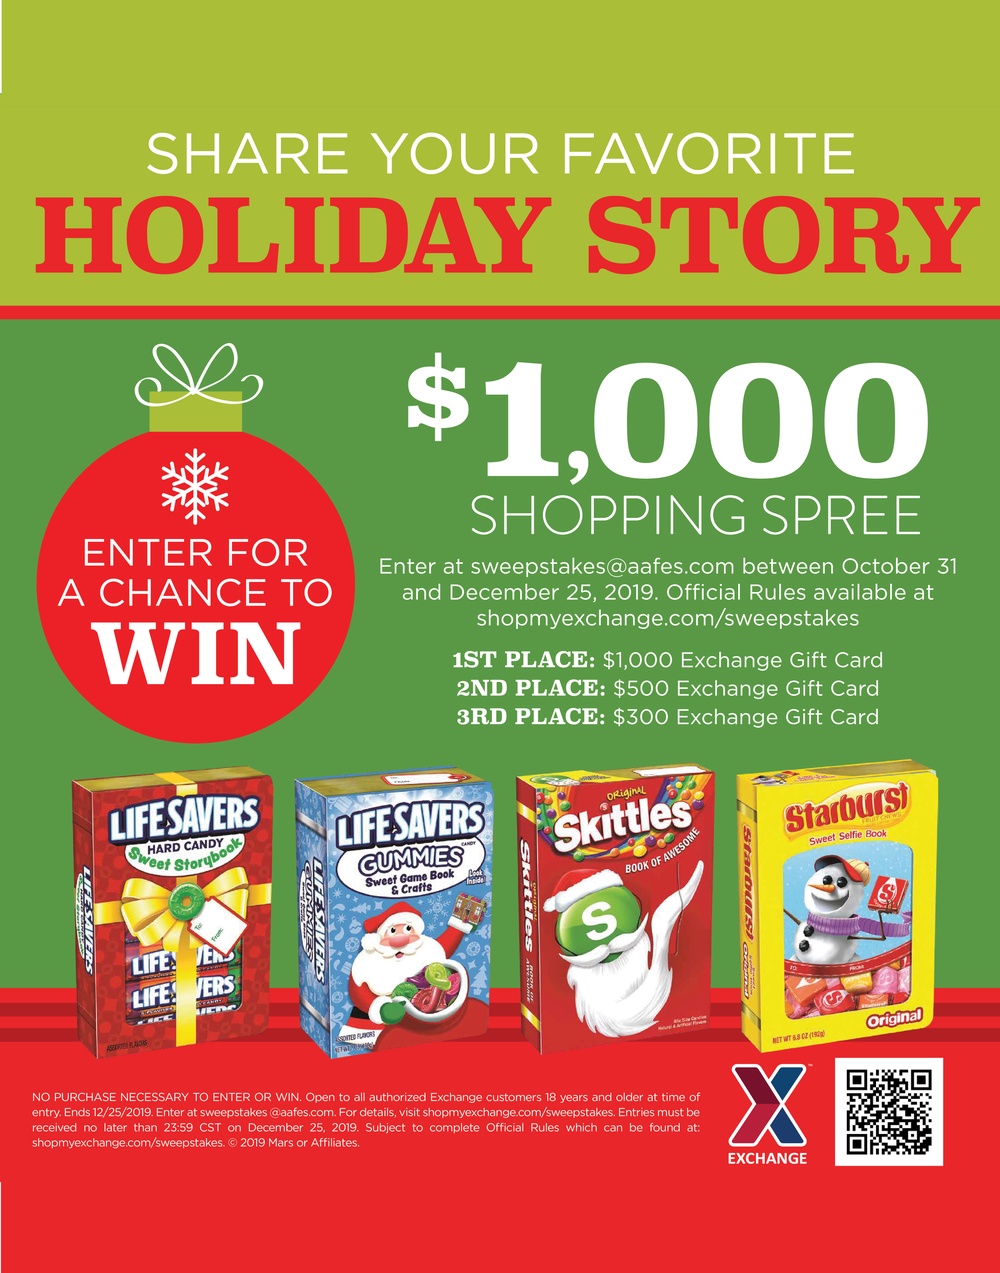 Exchange Giving Away More Than $25,000 in Prizes in Three Holiday Sweepstakes